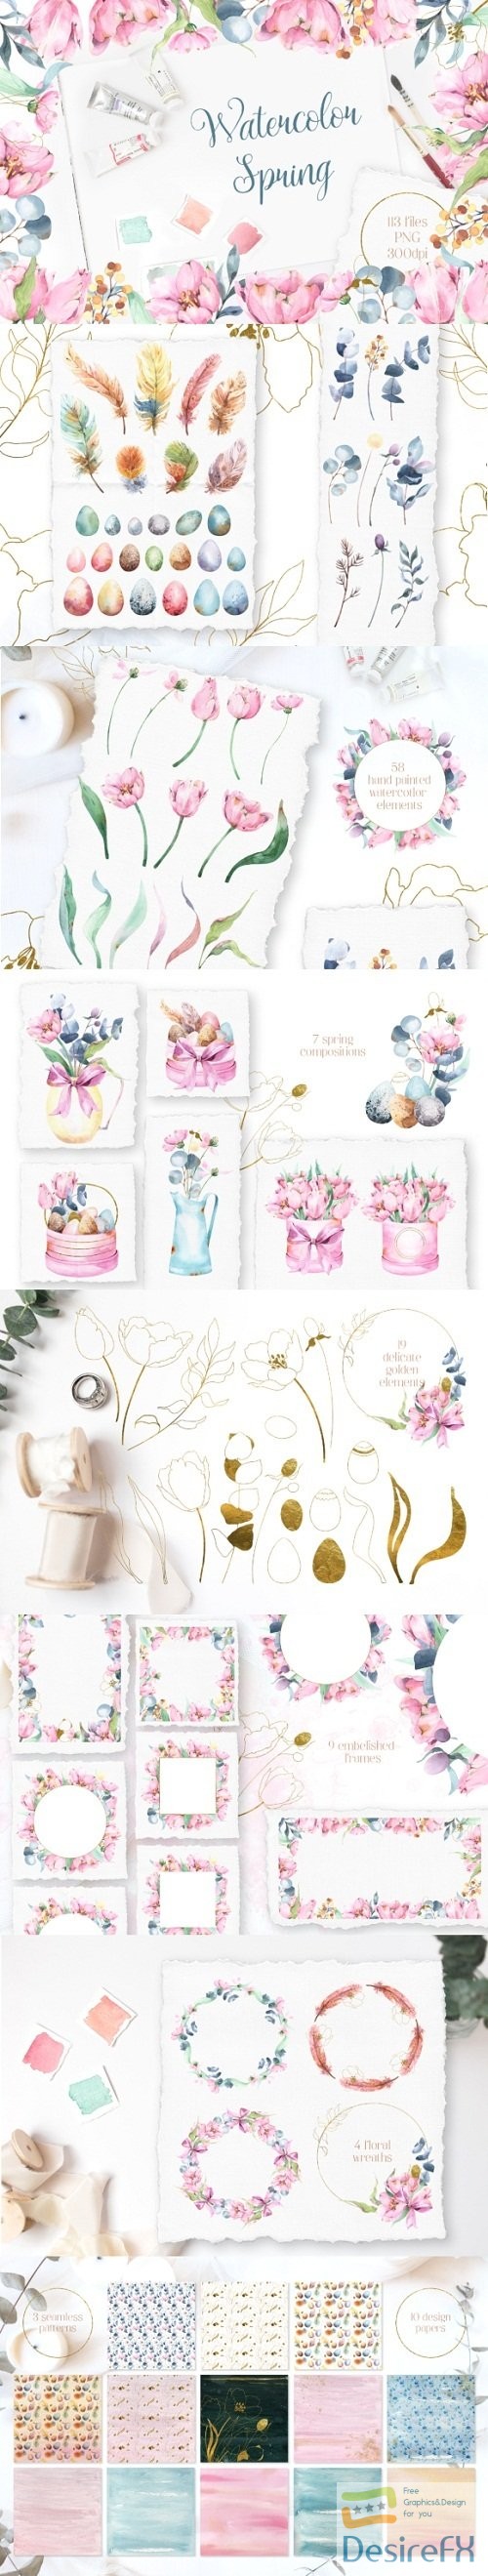 Watercolor Spring floral collection